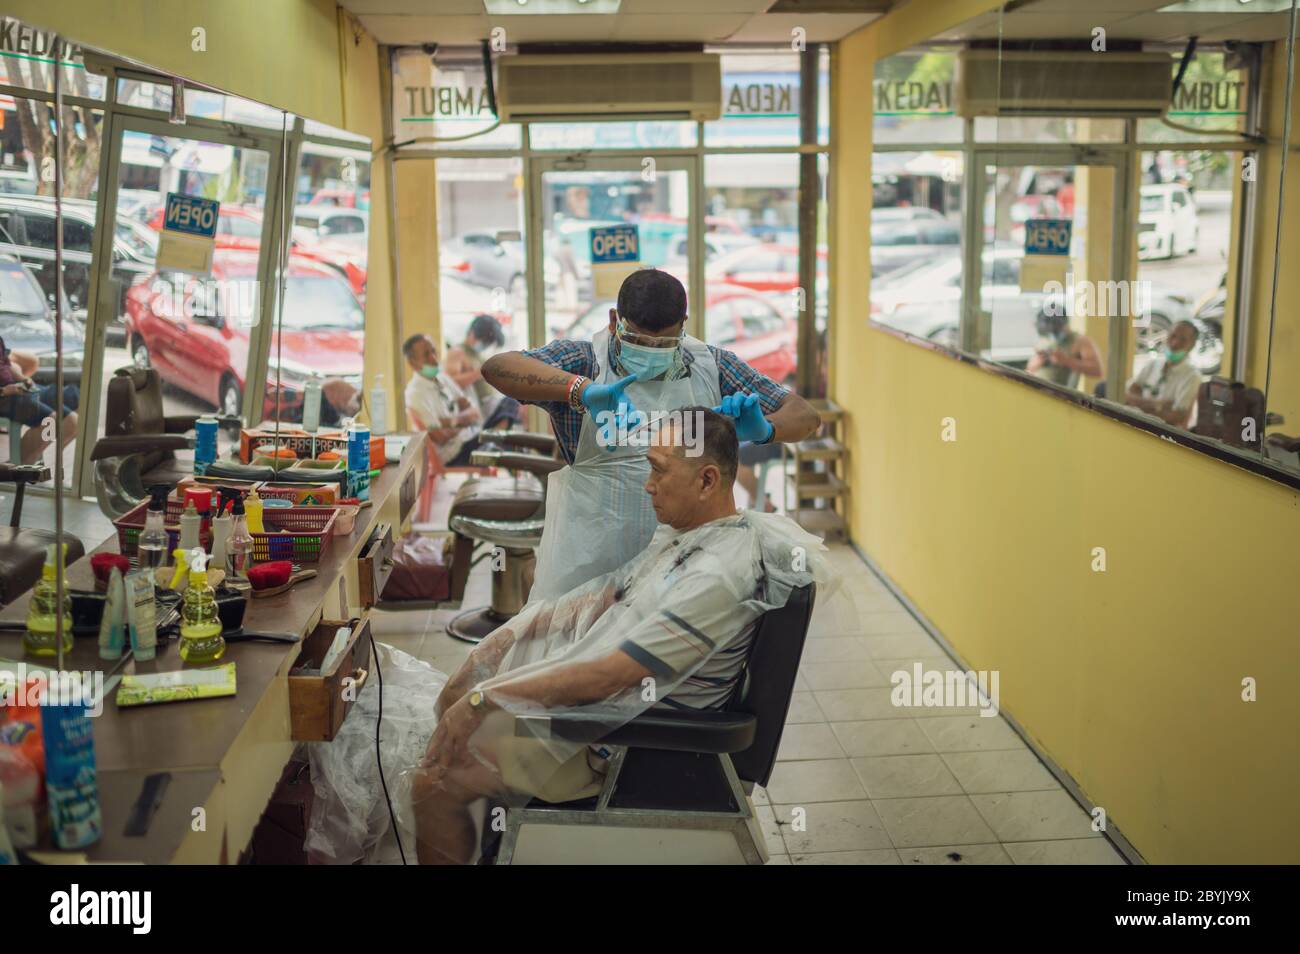 Kuala Lumpur, Malaysia. 10th June, 2020. A barber cuts hair for a customer at a barbershop in Kuala Lumpur, Malaysia, June 10, 2020. TO GO WITH 'Feature: Malaysians brave adventure in barbershops as COVID-19 restrictions ease' Credit: Zhu Wei/Xinhua/Alamy Live News Stock Photo